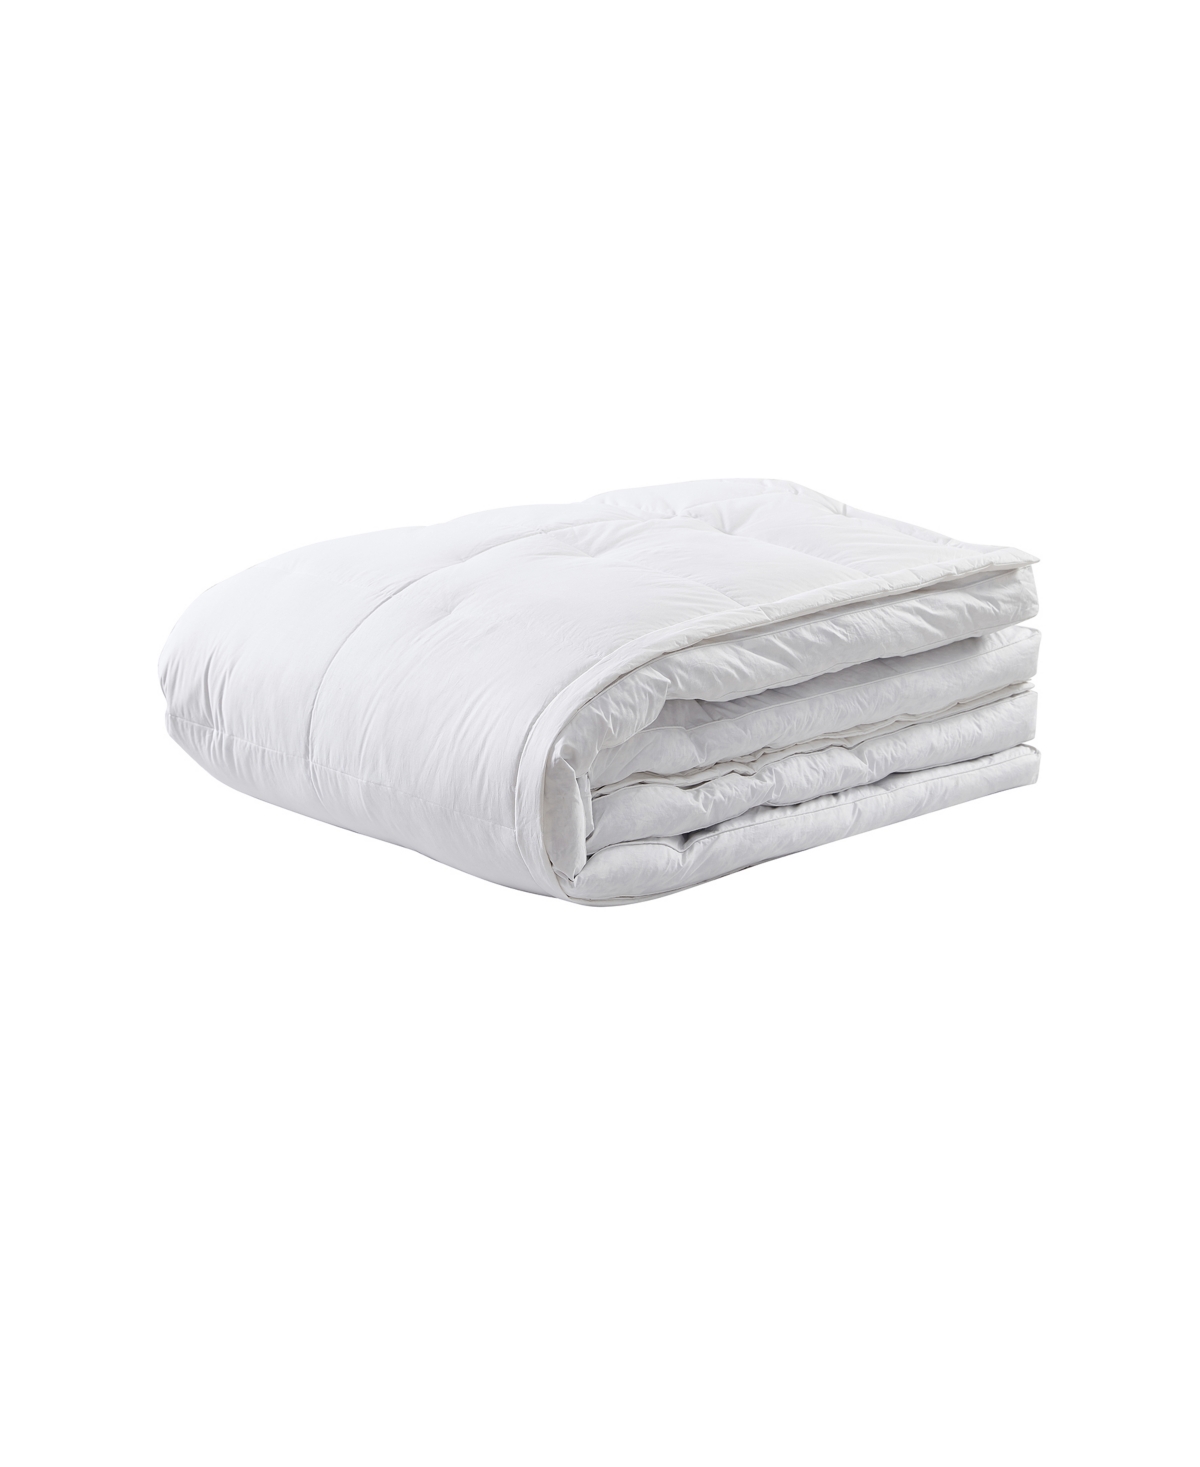 Serta Heiq Cooling 3" White Downtop Featherbeds, Twin